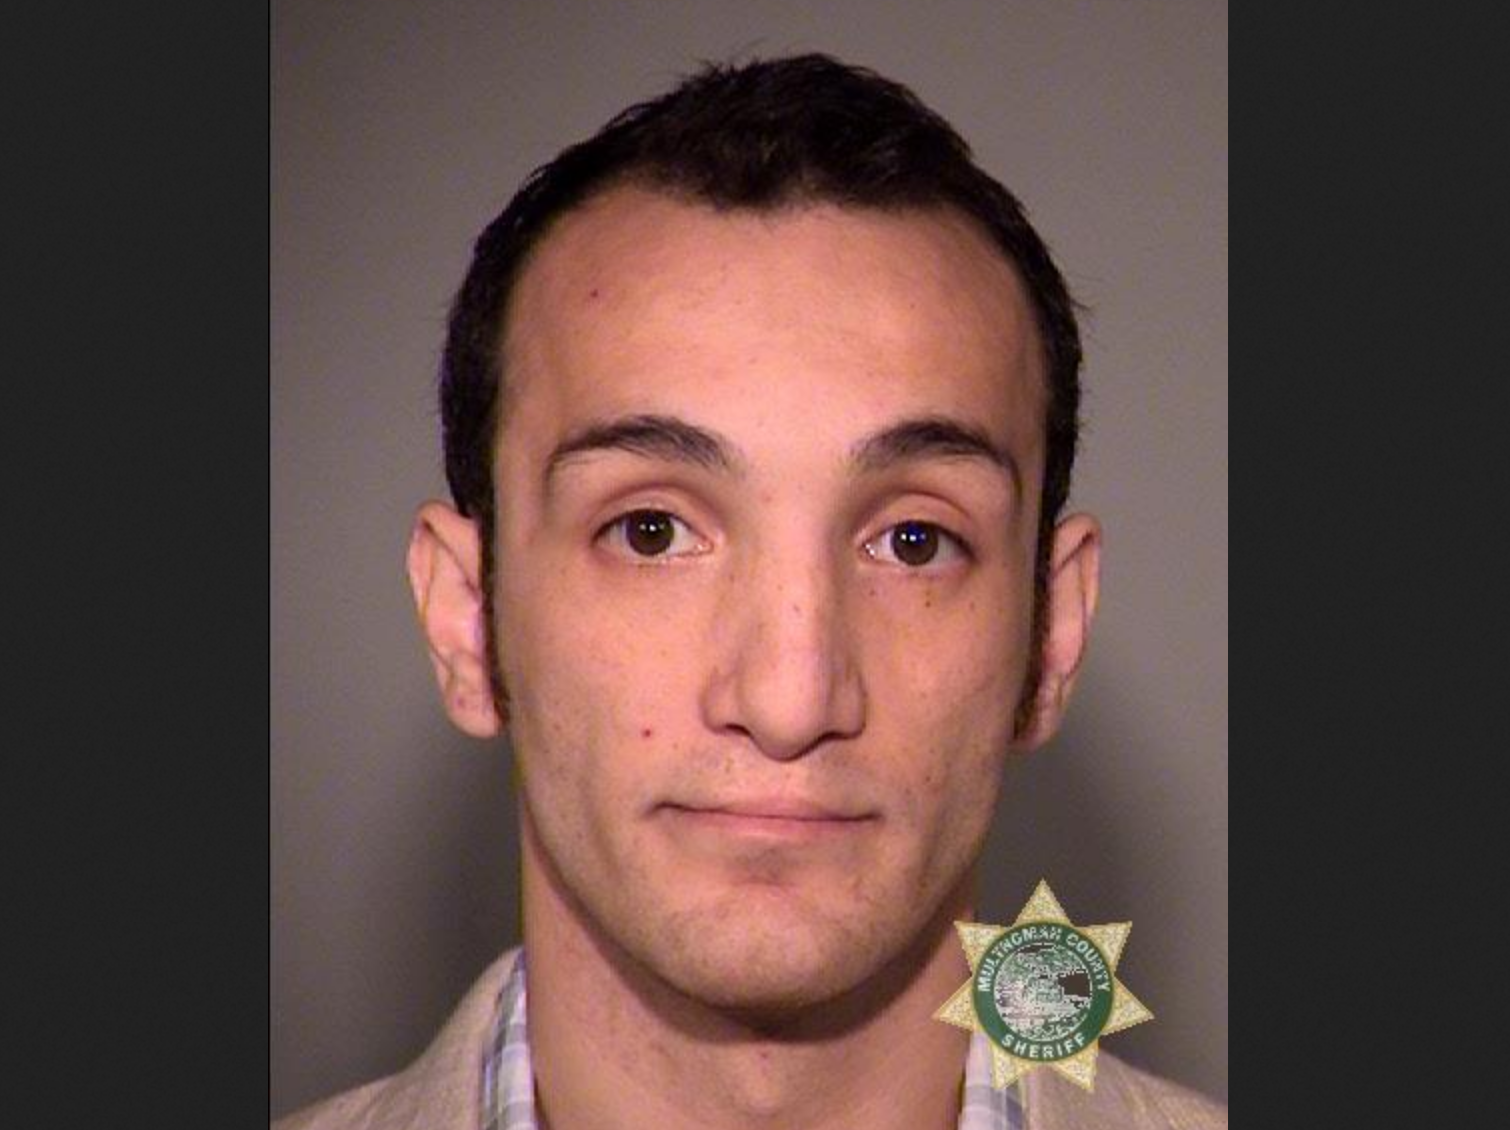 Serious Hard Spanking Pacific Force - Man who recorded himself spanking girl's bottom gets 17 years in prison -  oregonlive.com